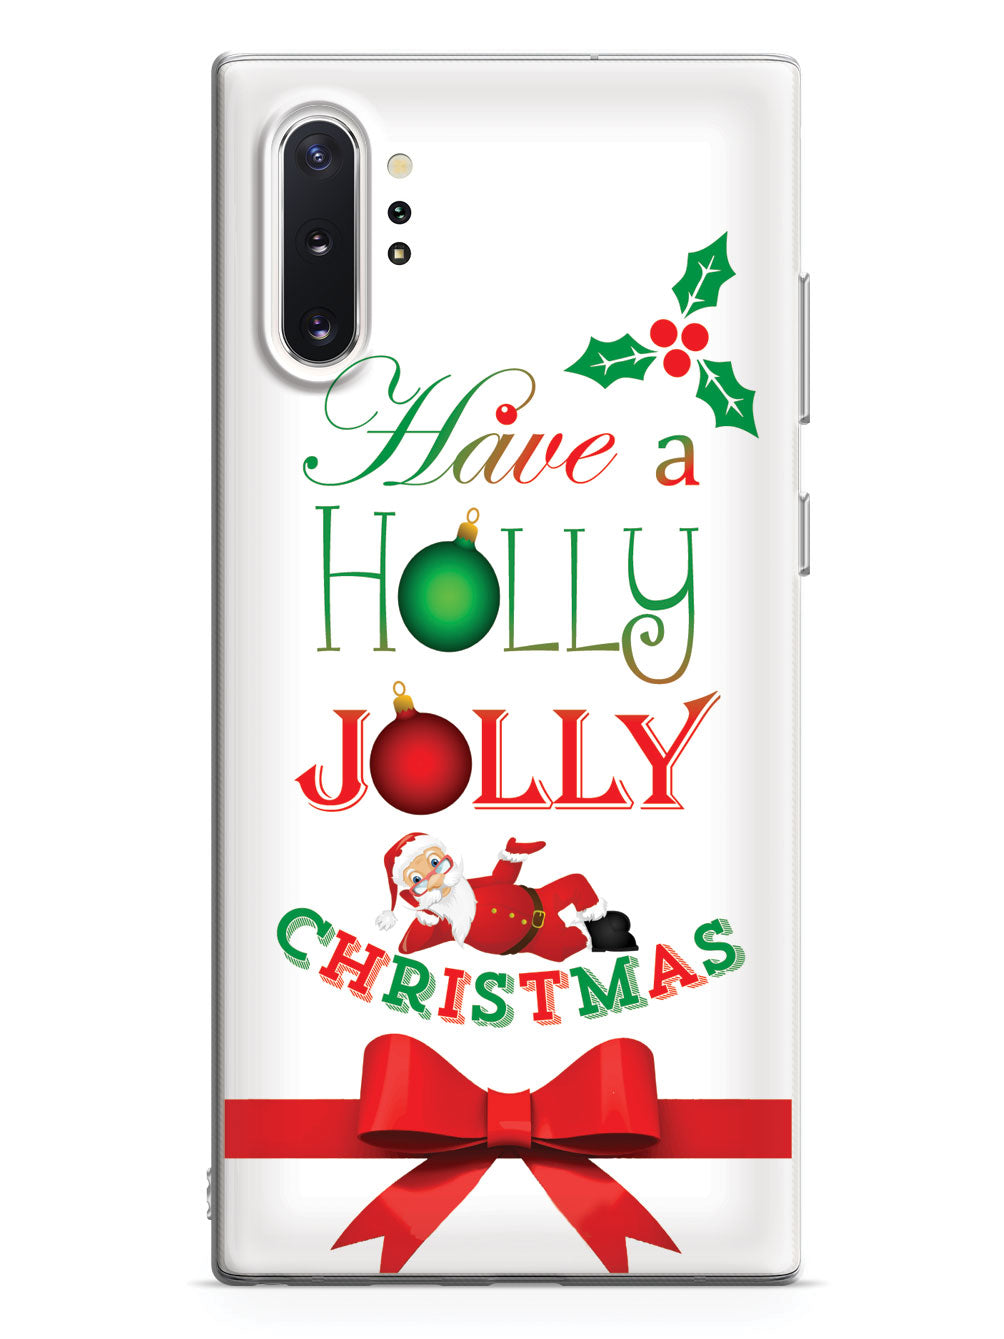 7 Must-Have Mobile Accessories This Christmas